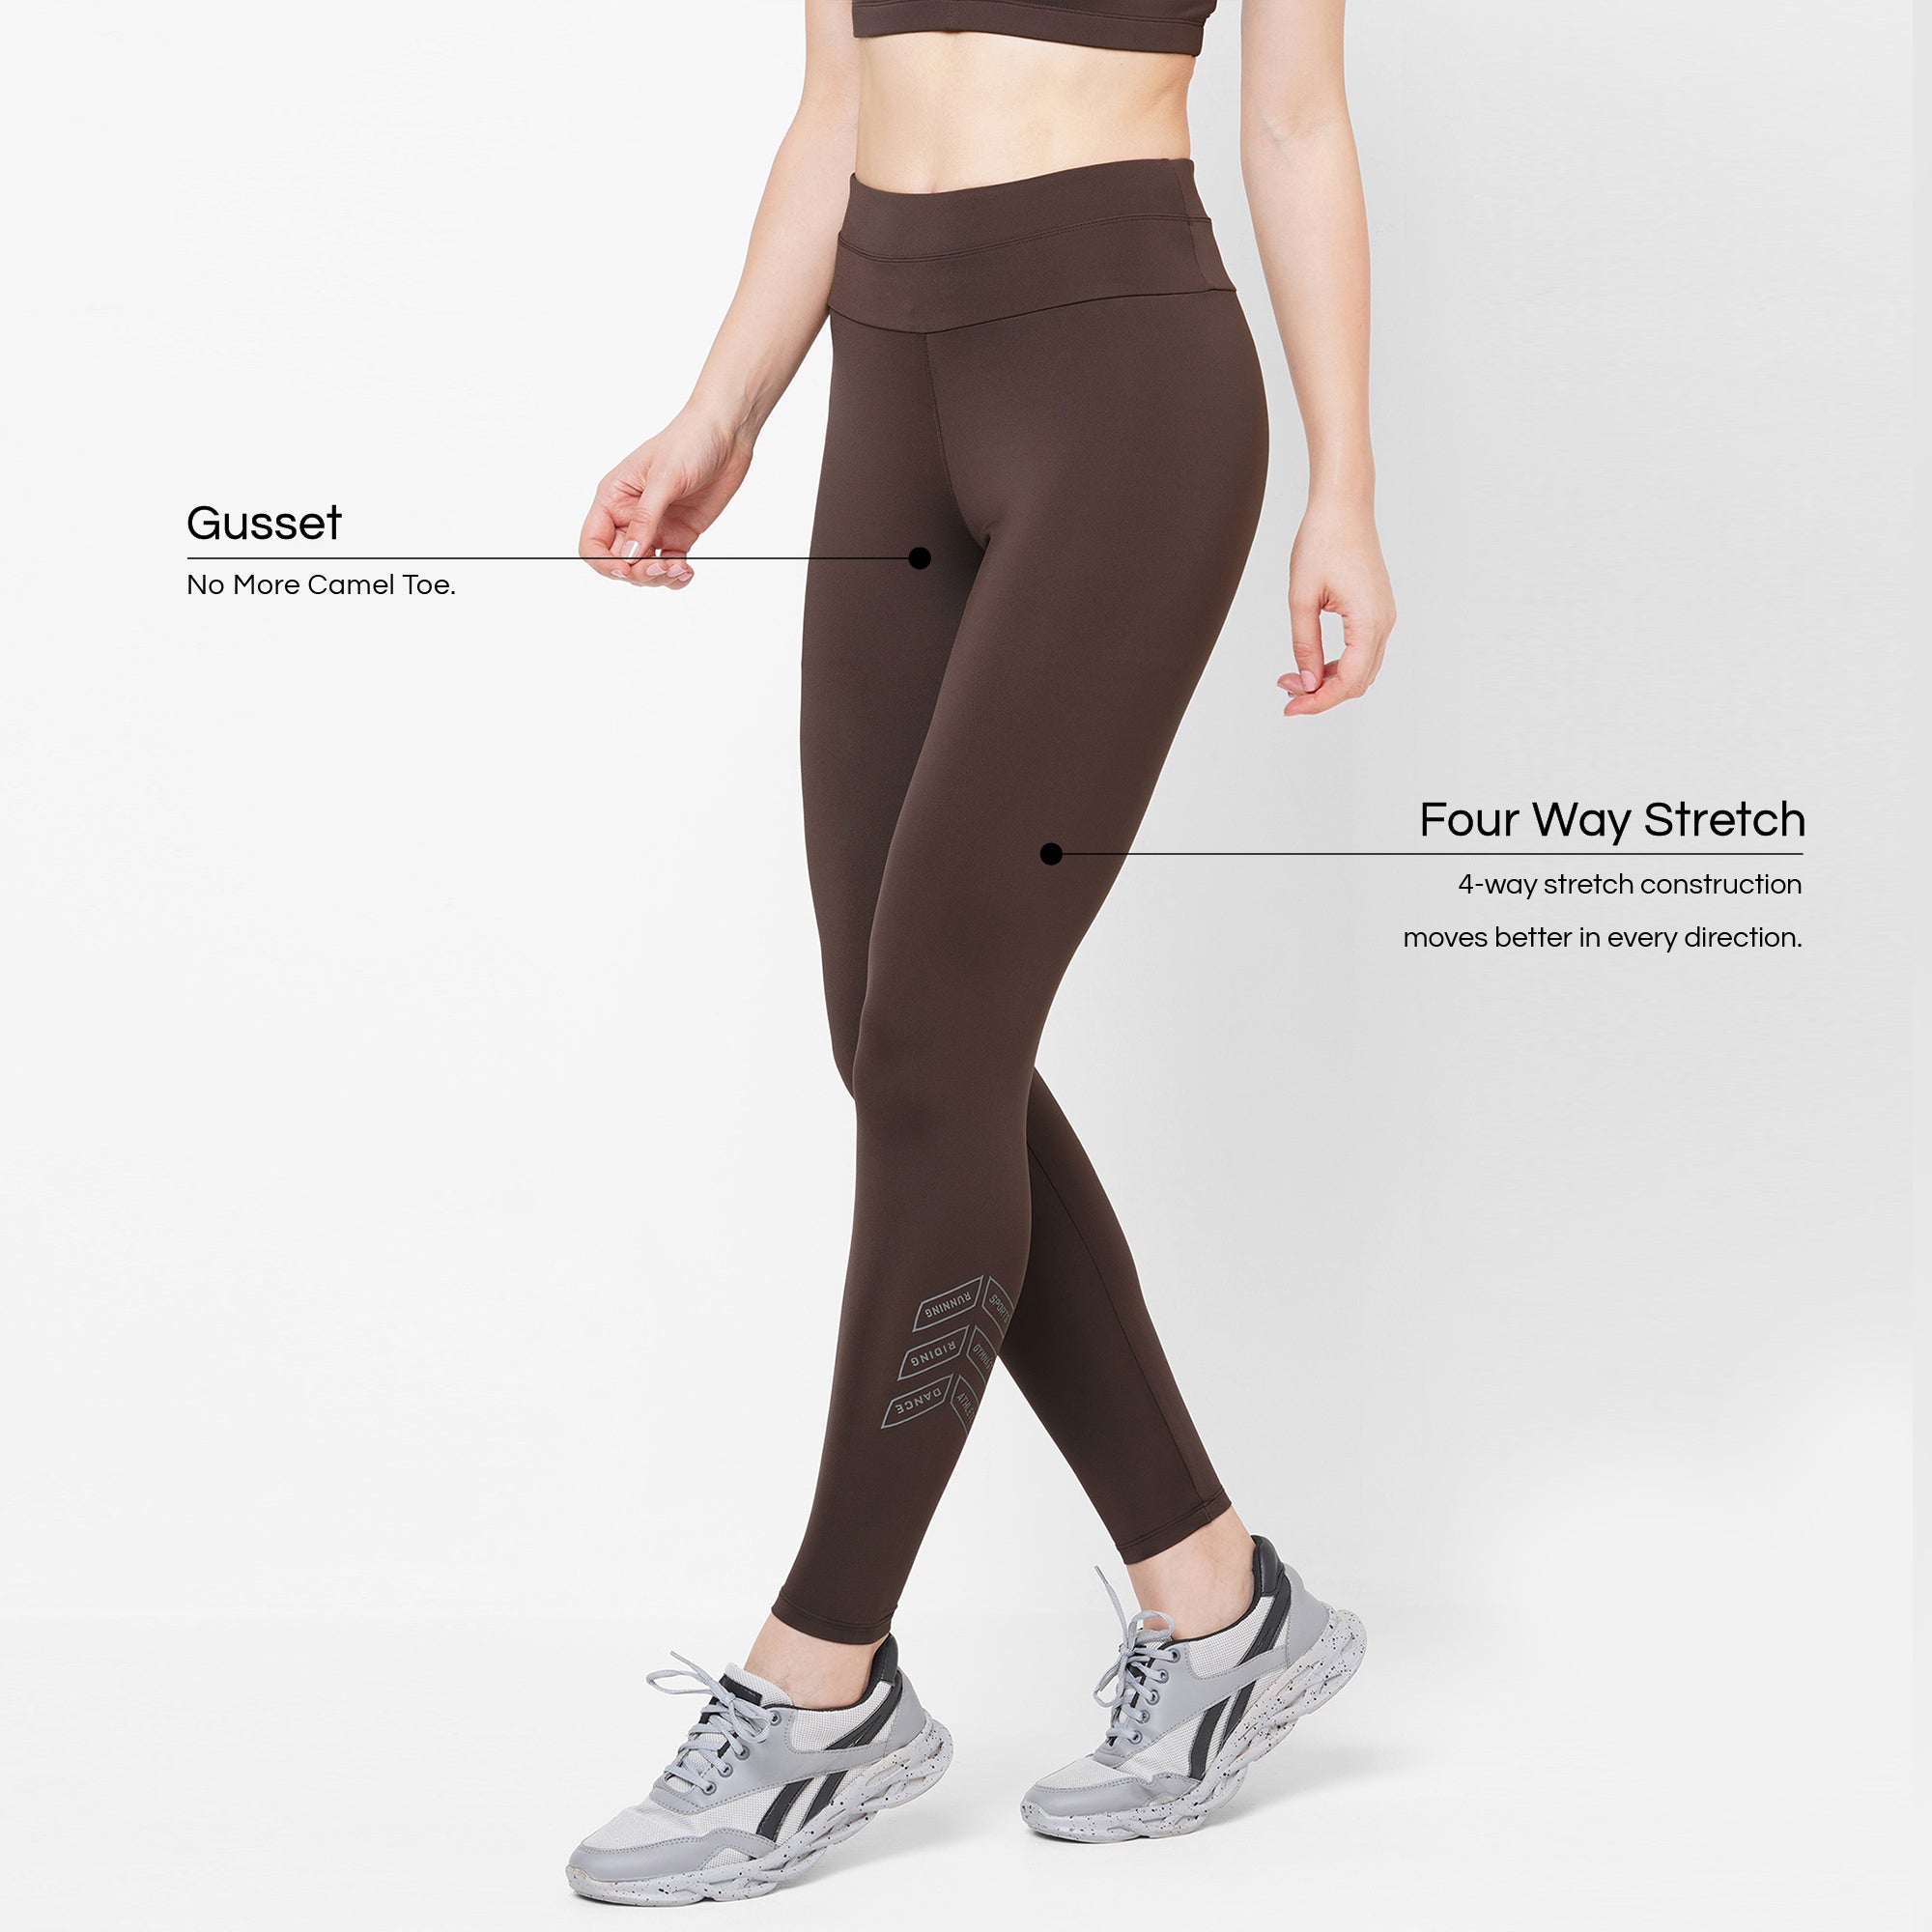 Our Top 5 Athletic Leggings We Just Gotta Have - The B-Word Blog